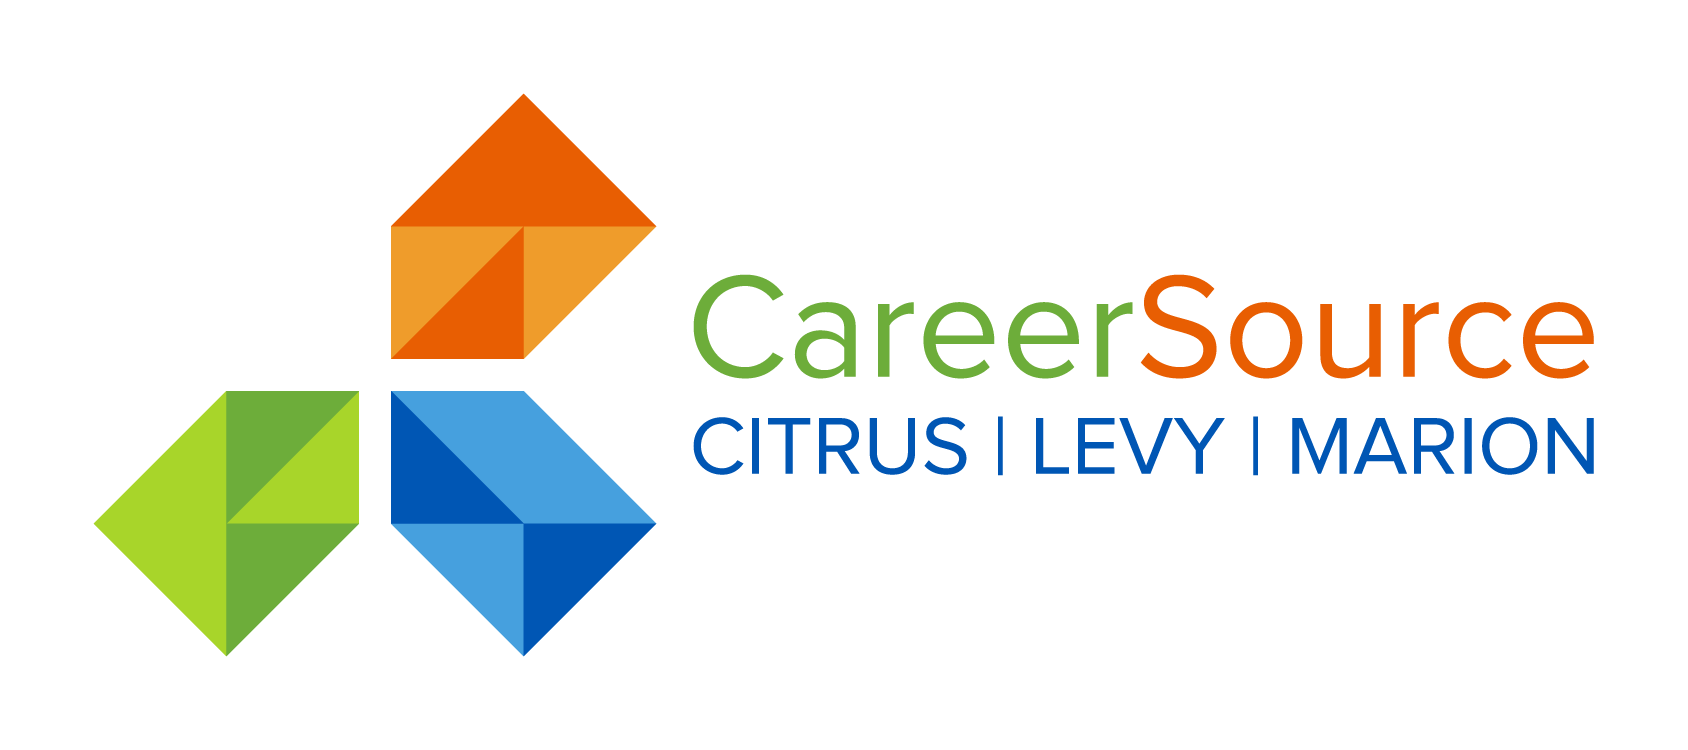 CareerSource Citrus Levy Marion logo